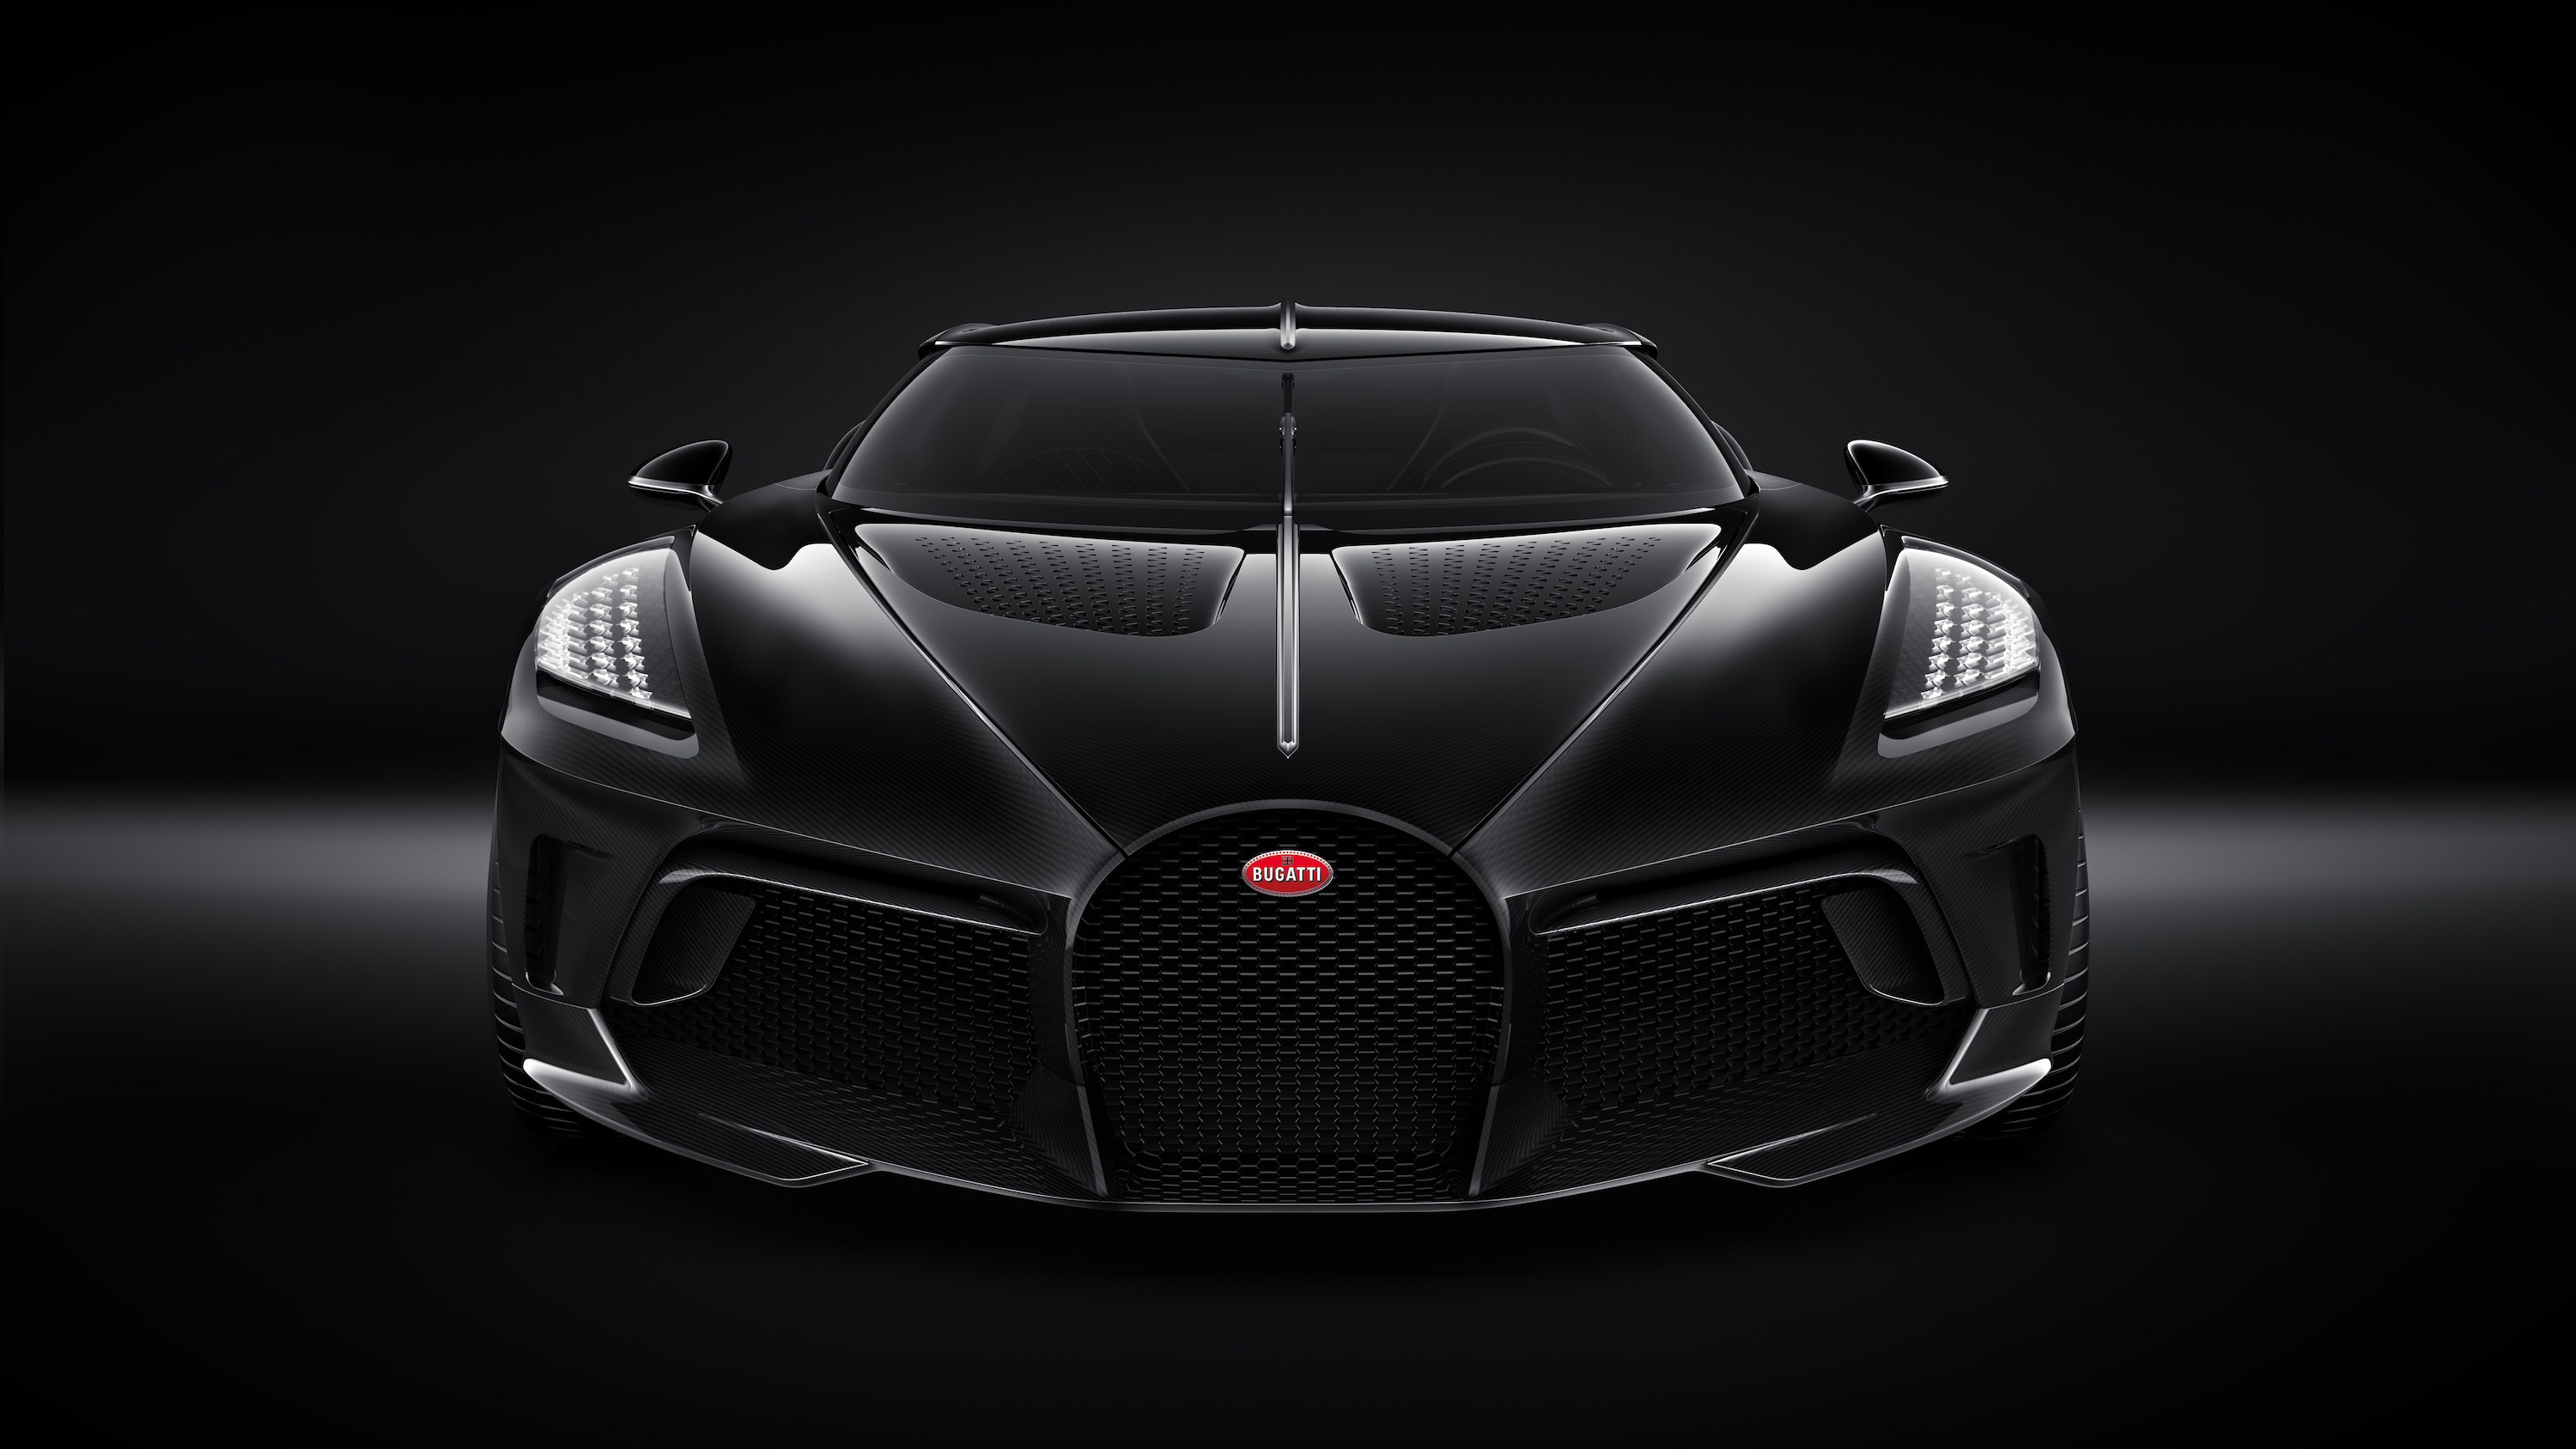 What Inspired the Iconic Bugatti Grill- Horseshoe or Egg?